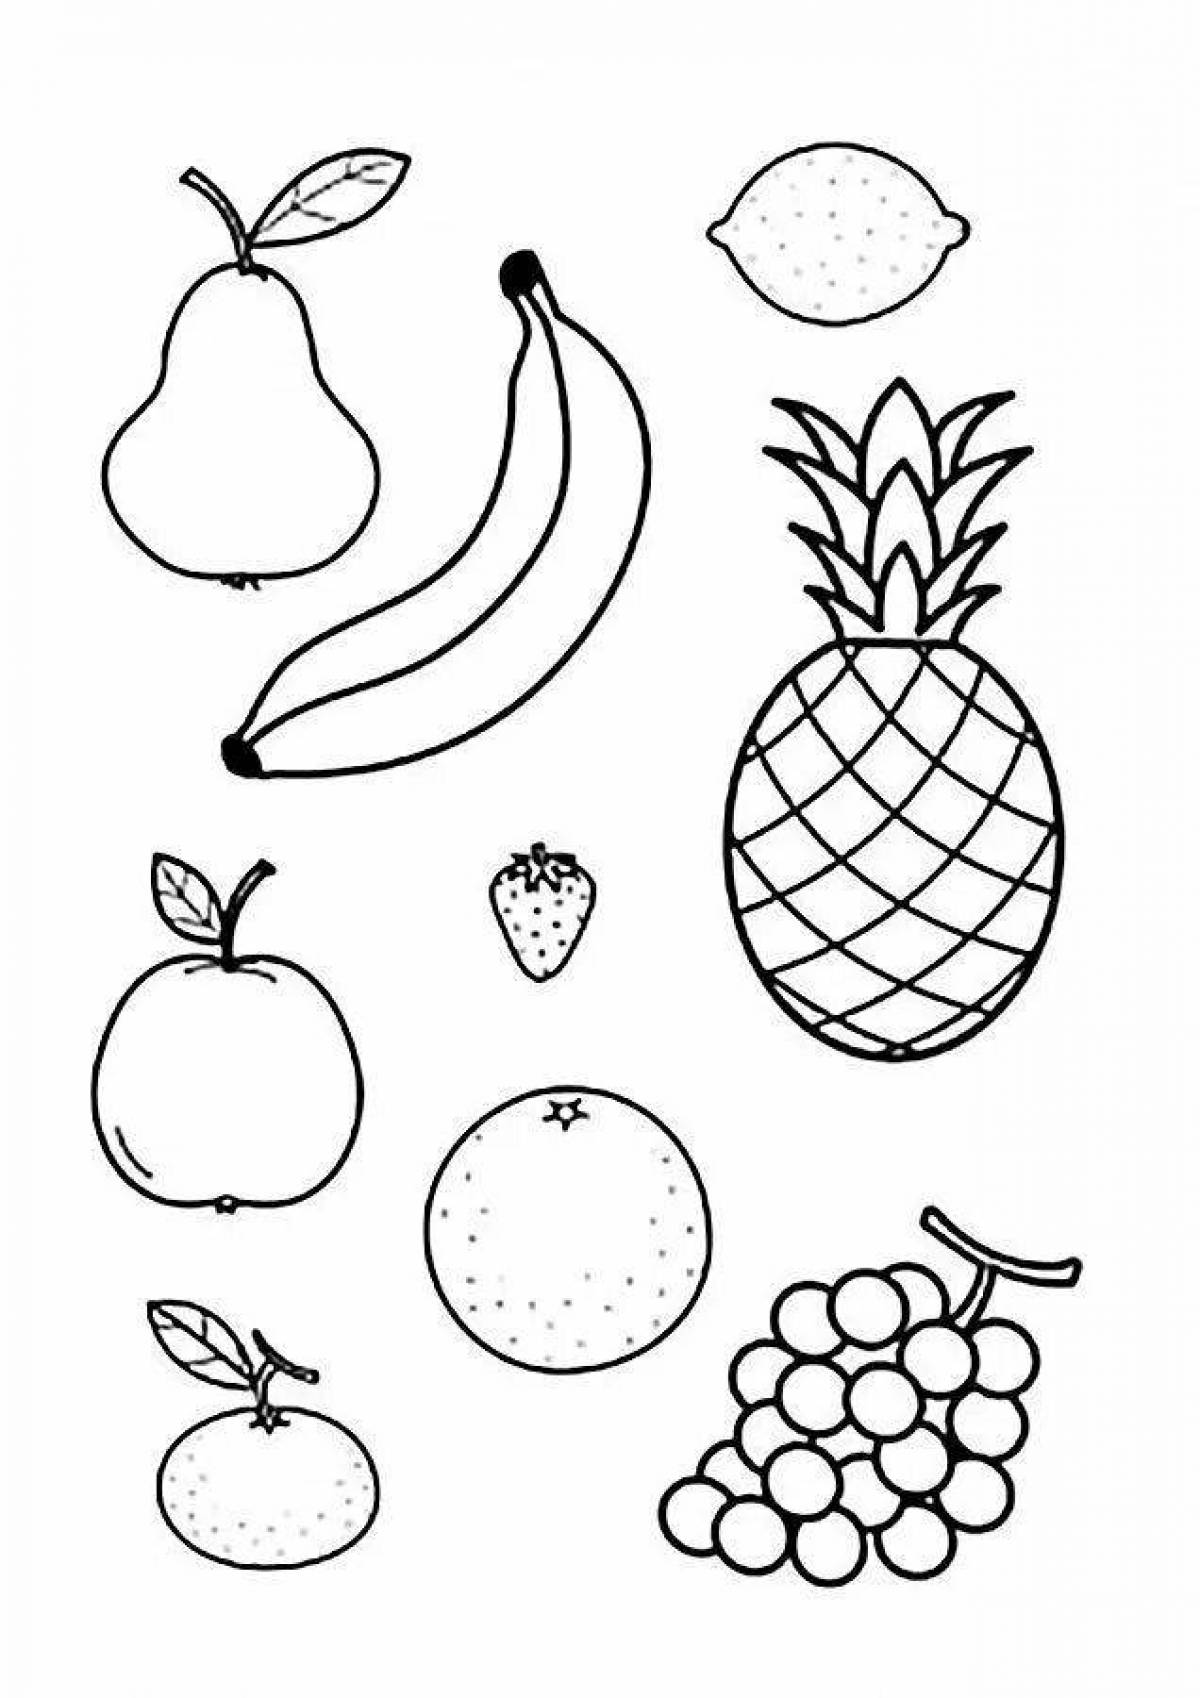 Sweet fruit and vegetable coloring pages